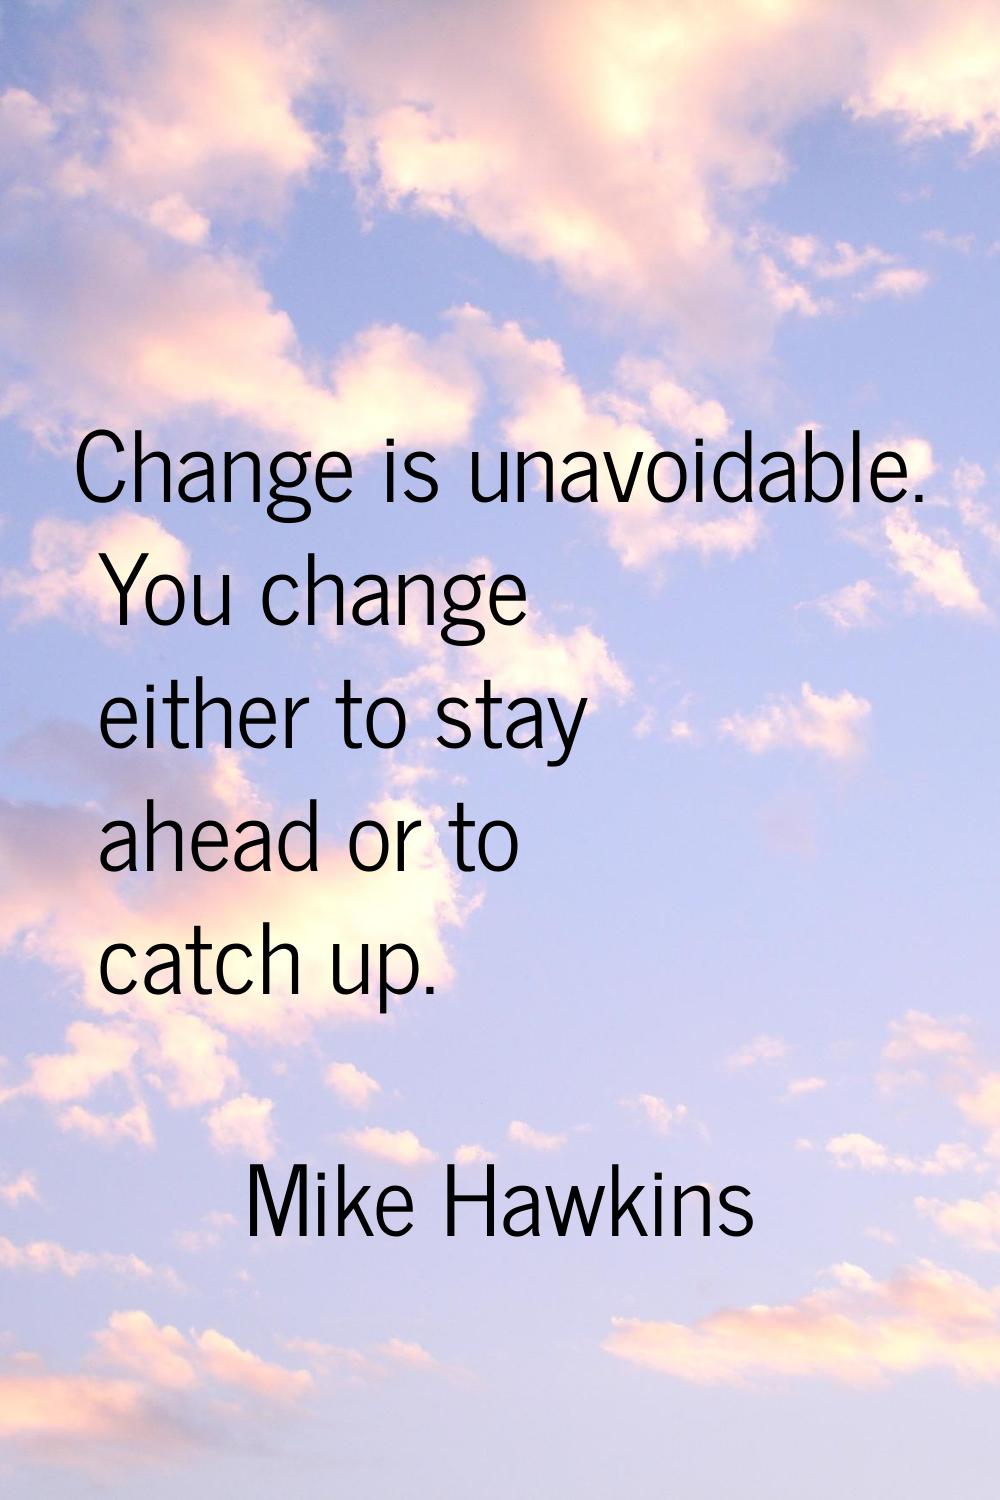 Change is unavoidable. You change either to stay ahead or to catch up.